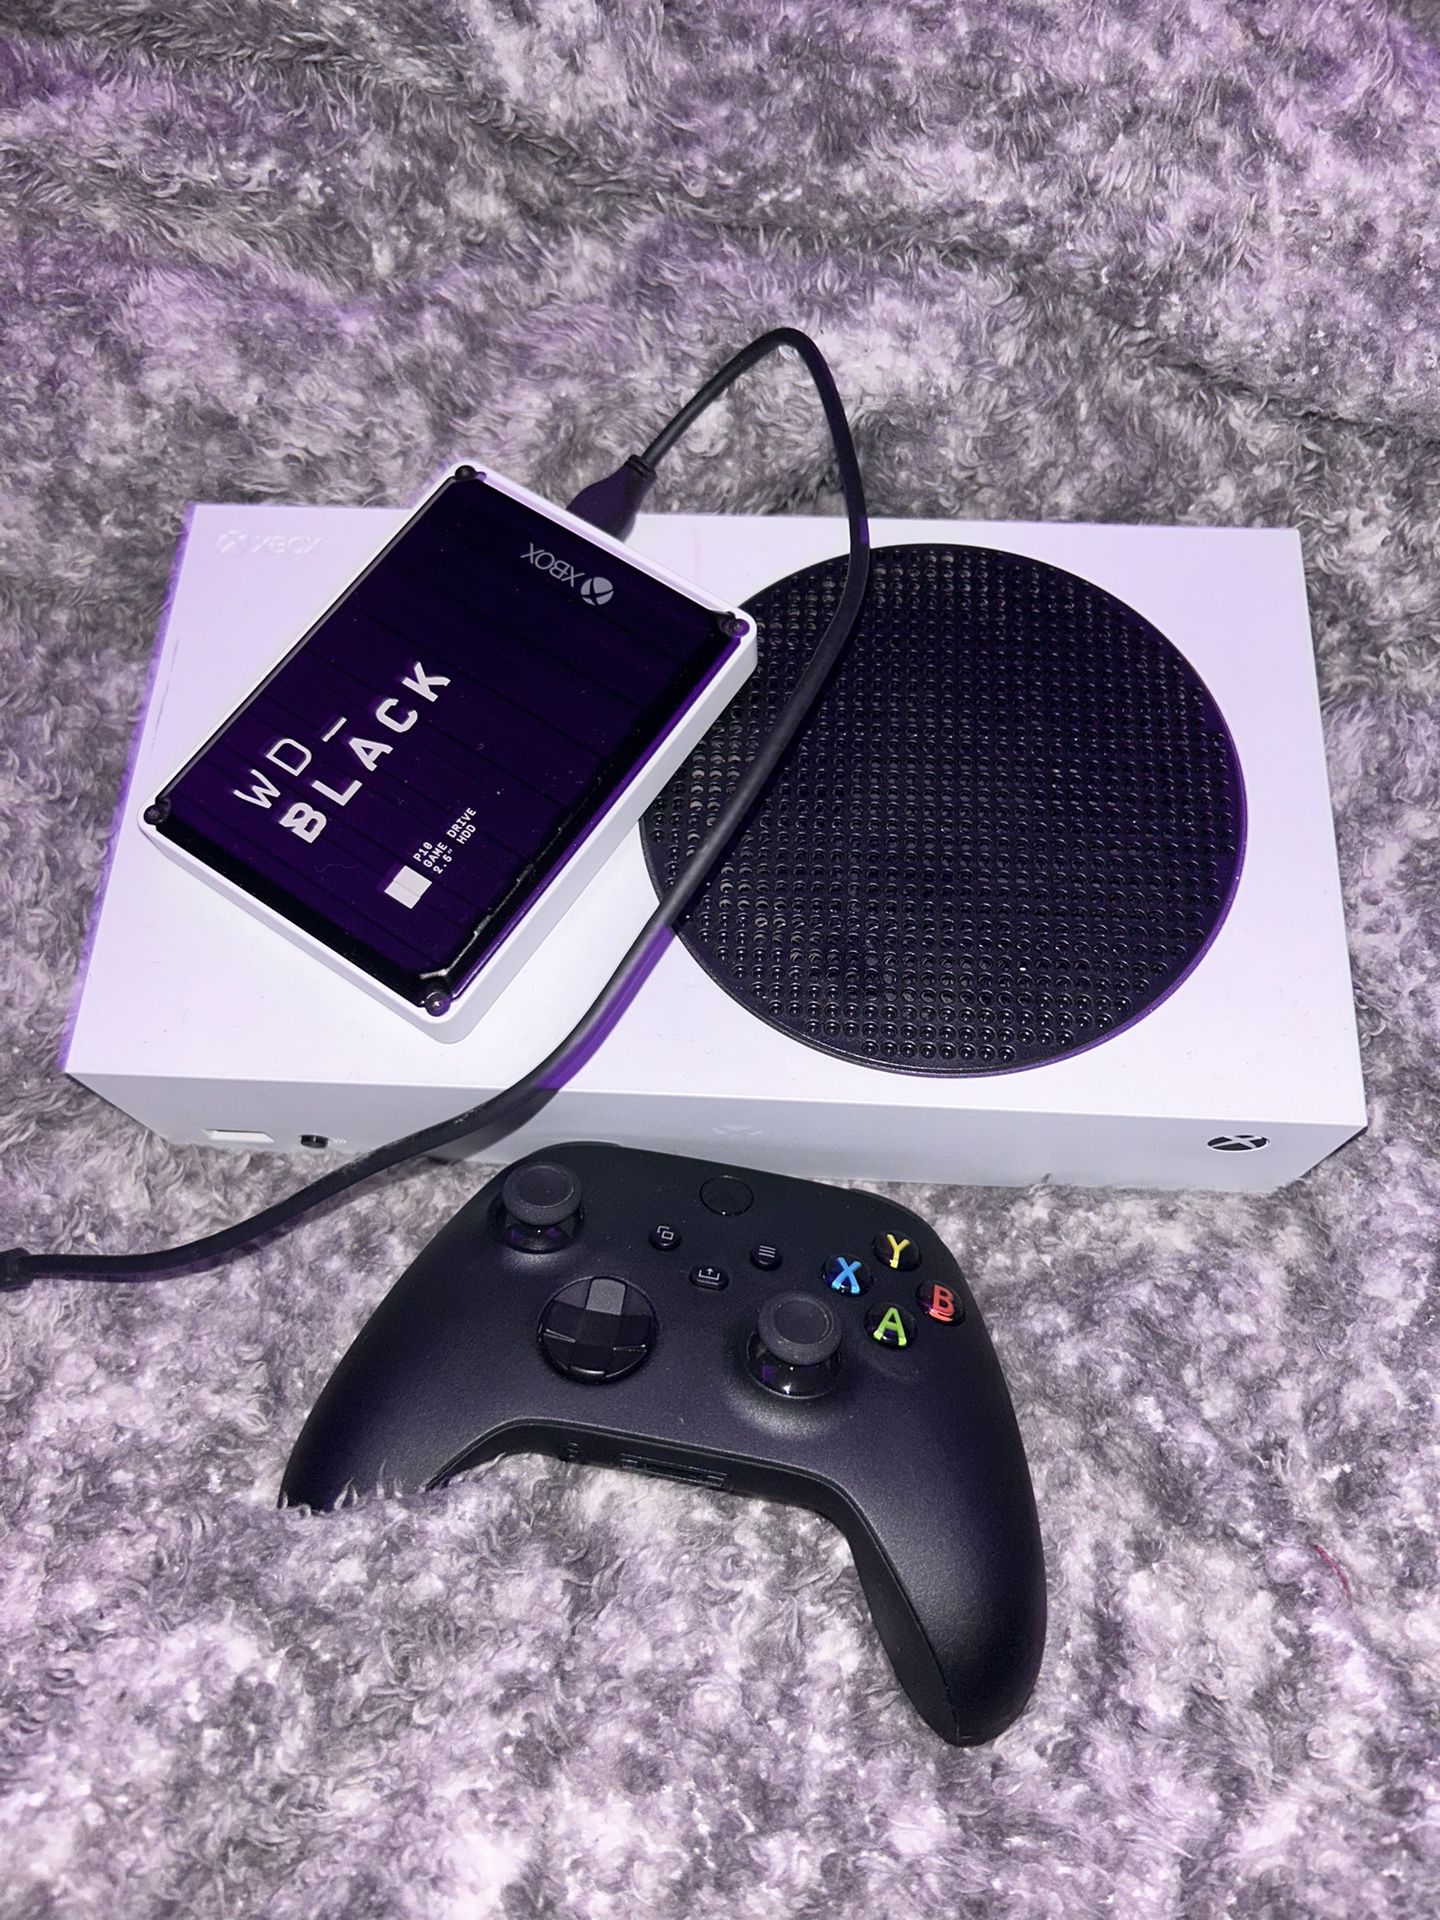 Xbox One Series S/WD_P10 Game Drive 